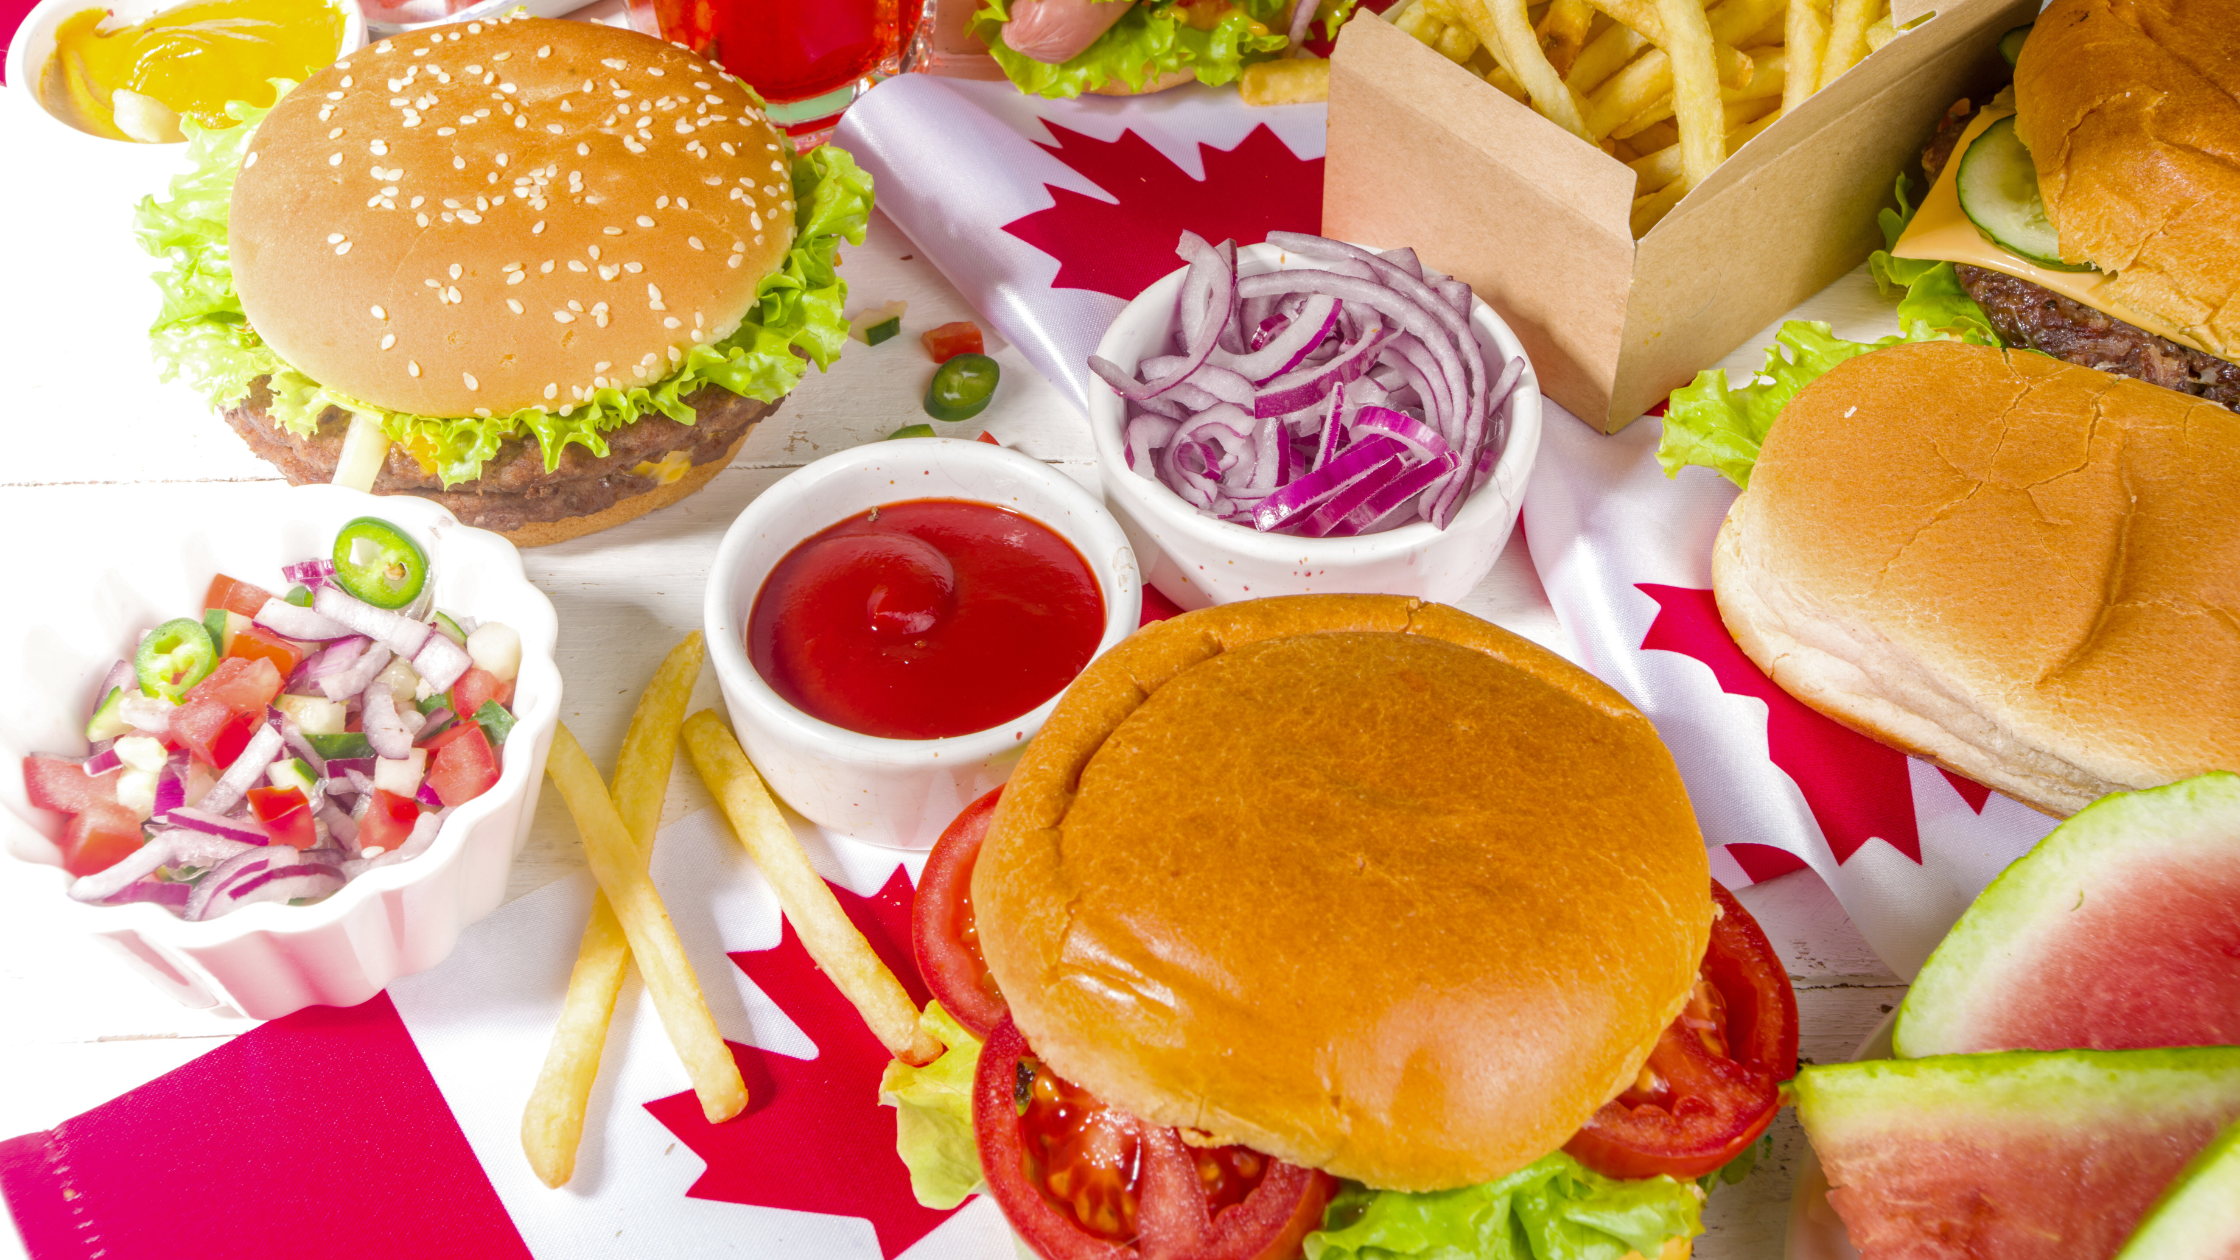 Image of Canadian food with Canada flag